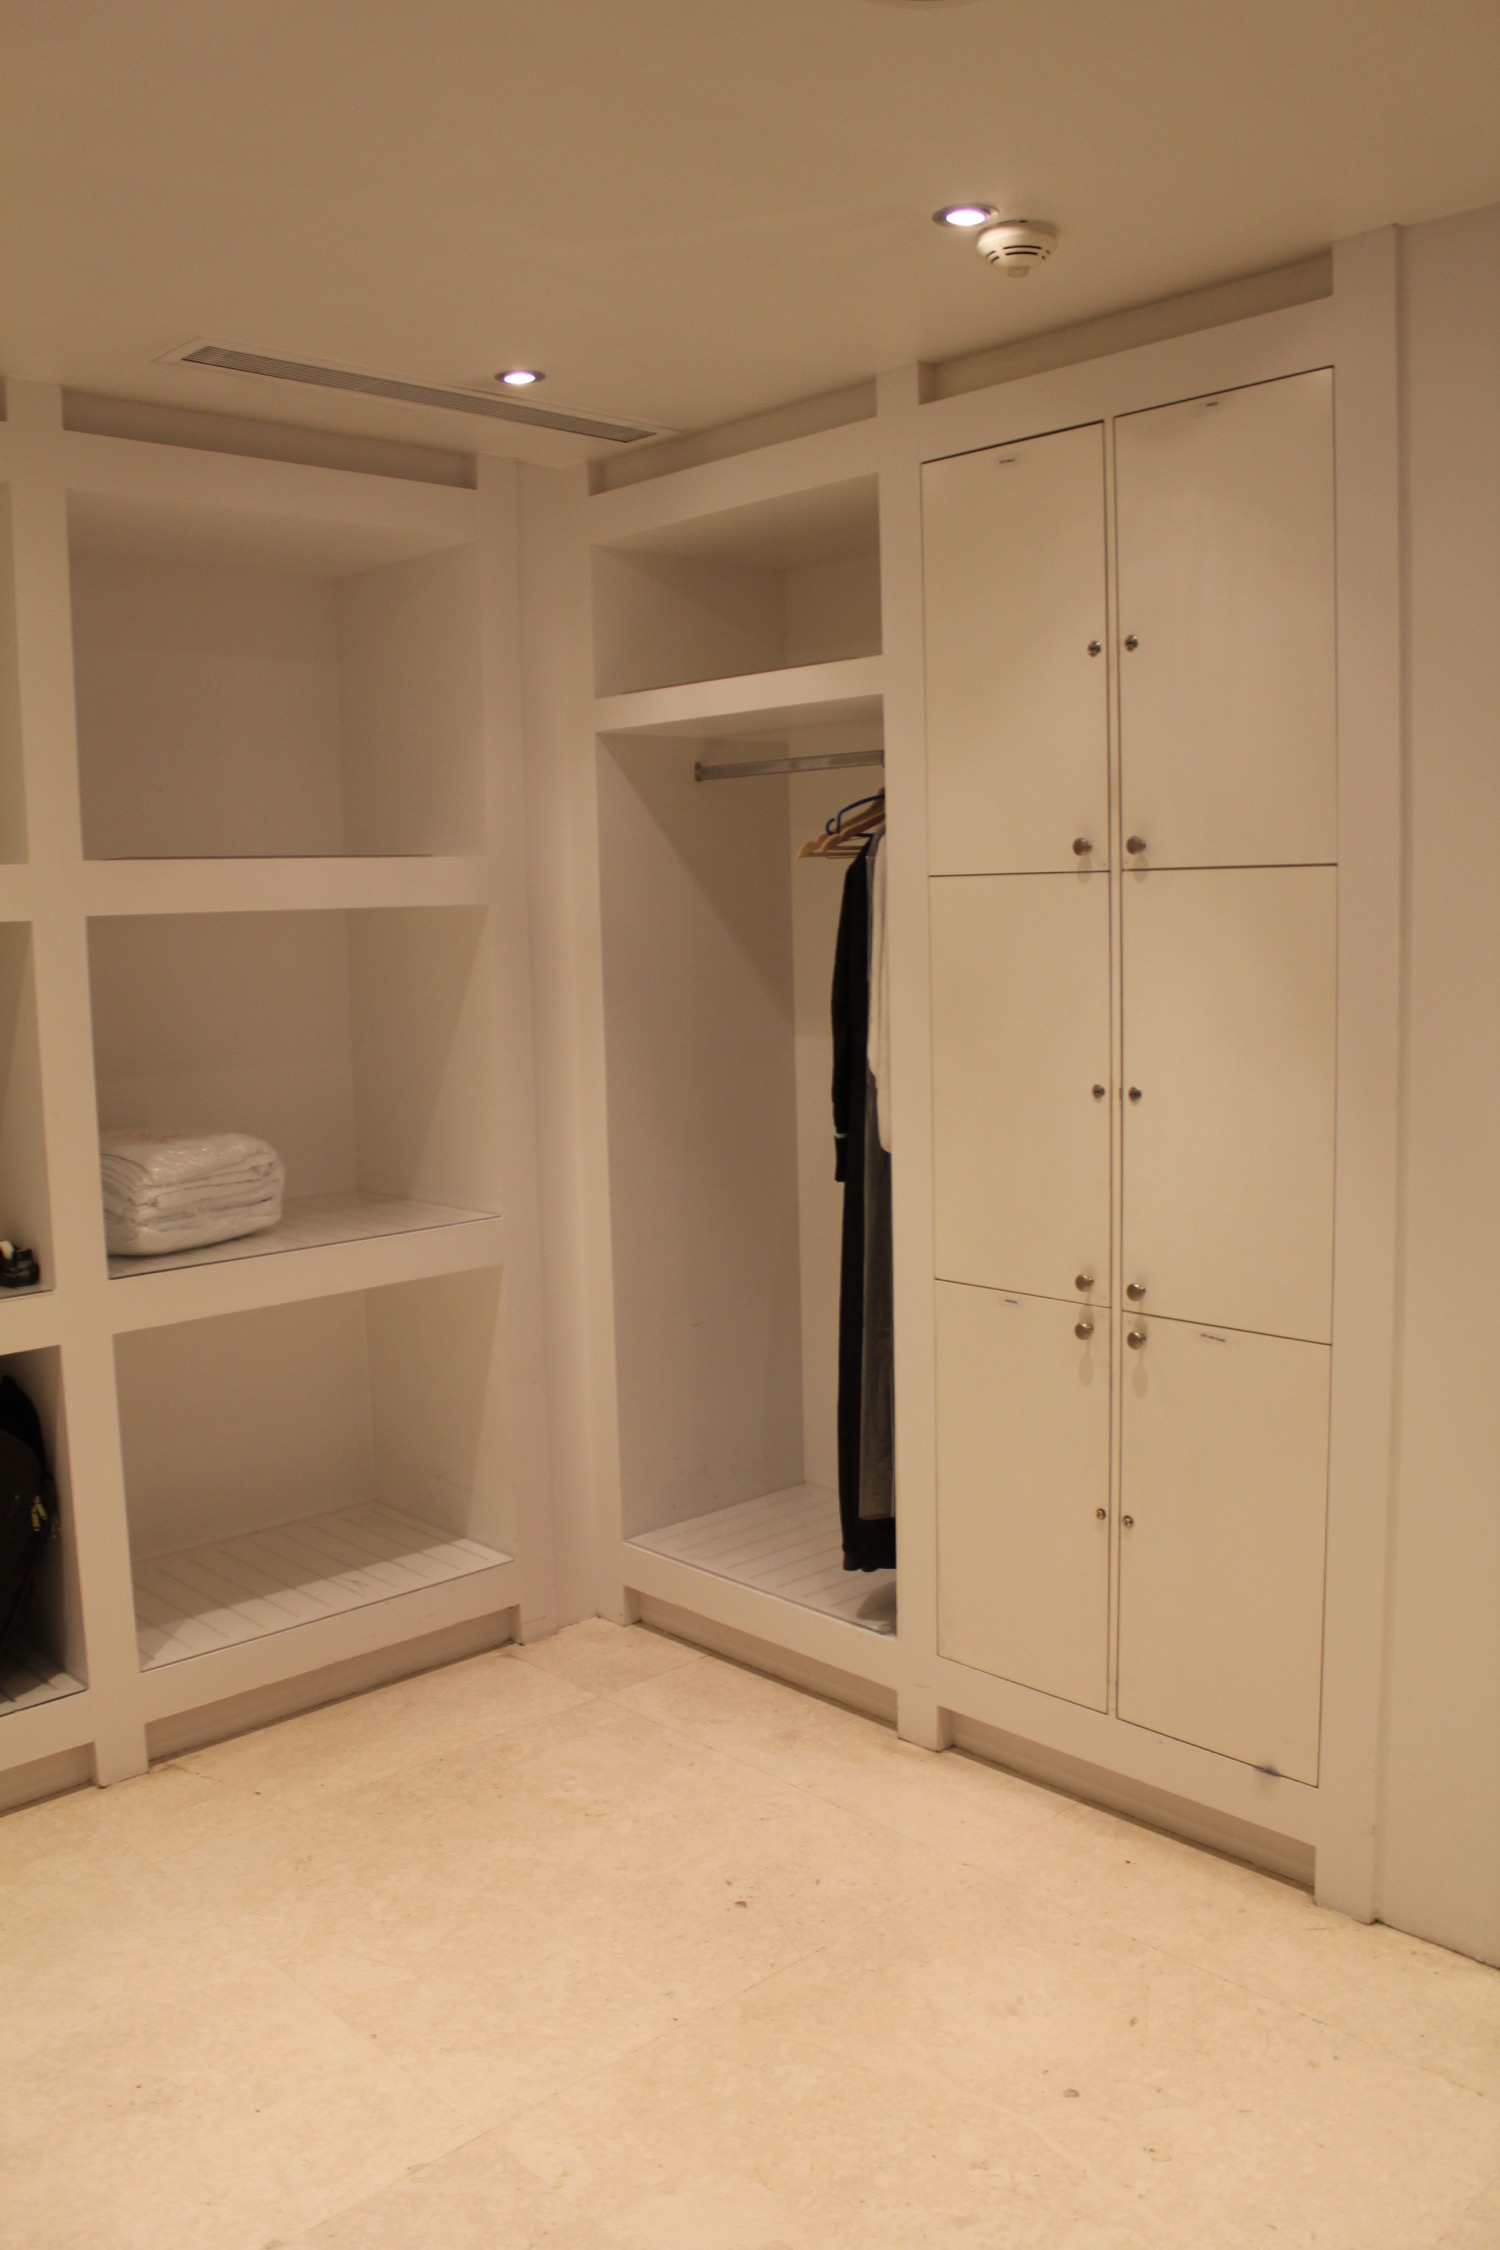 a white closet with shelves and a light on the ceiling